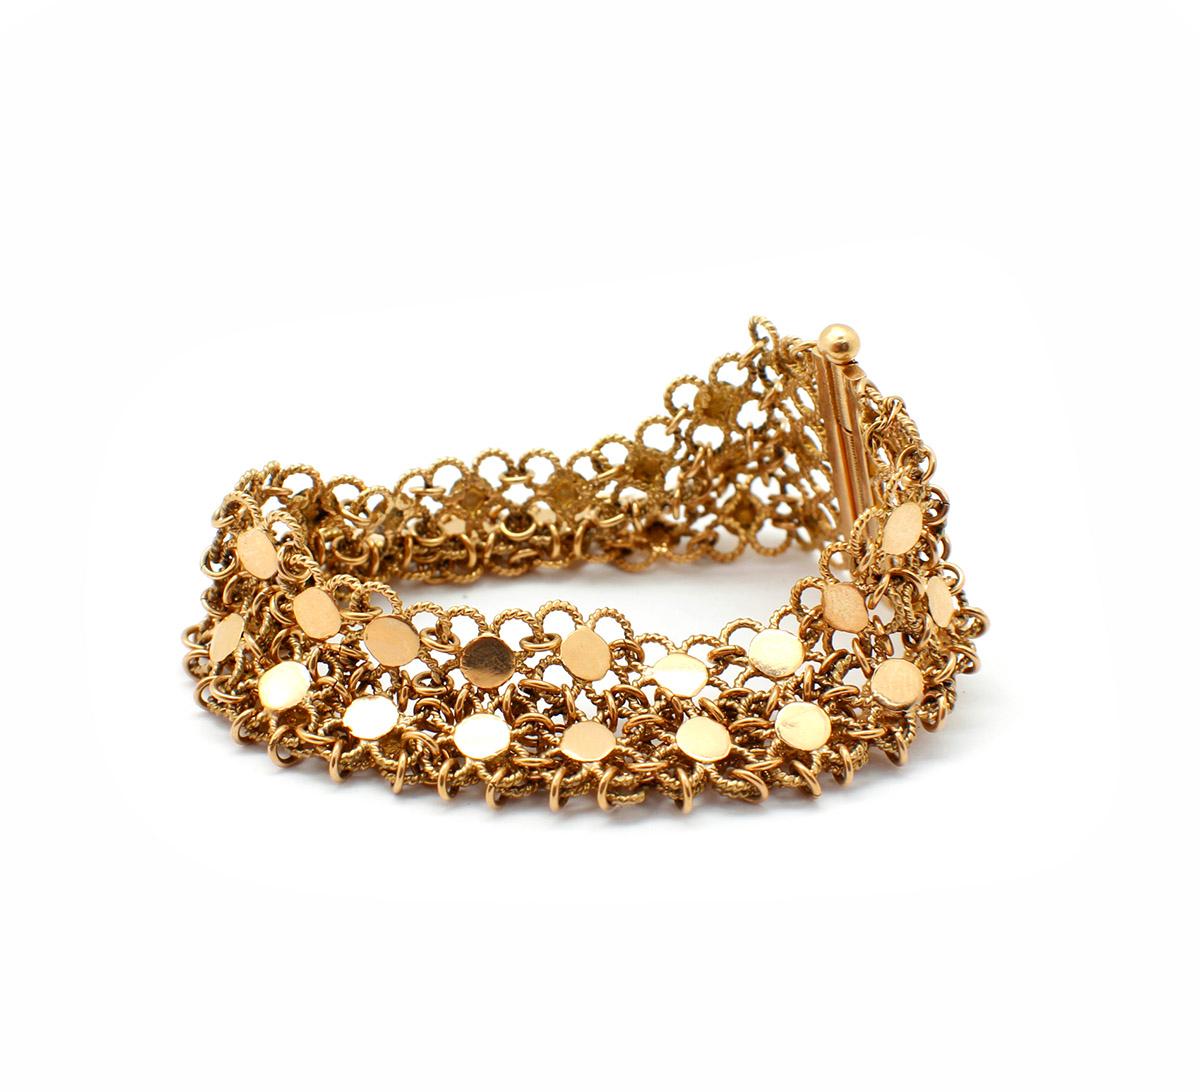 This bracelet is made in 18k yellow gold. It measures 27mm wide, and it will fit up to a 6.75-inch wrist. The piece weighs 41.56 grams.